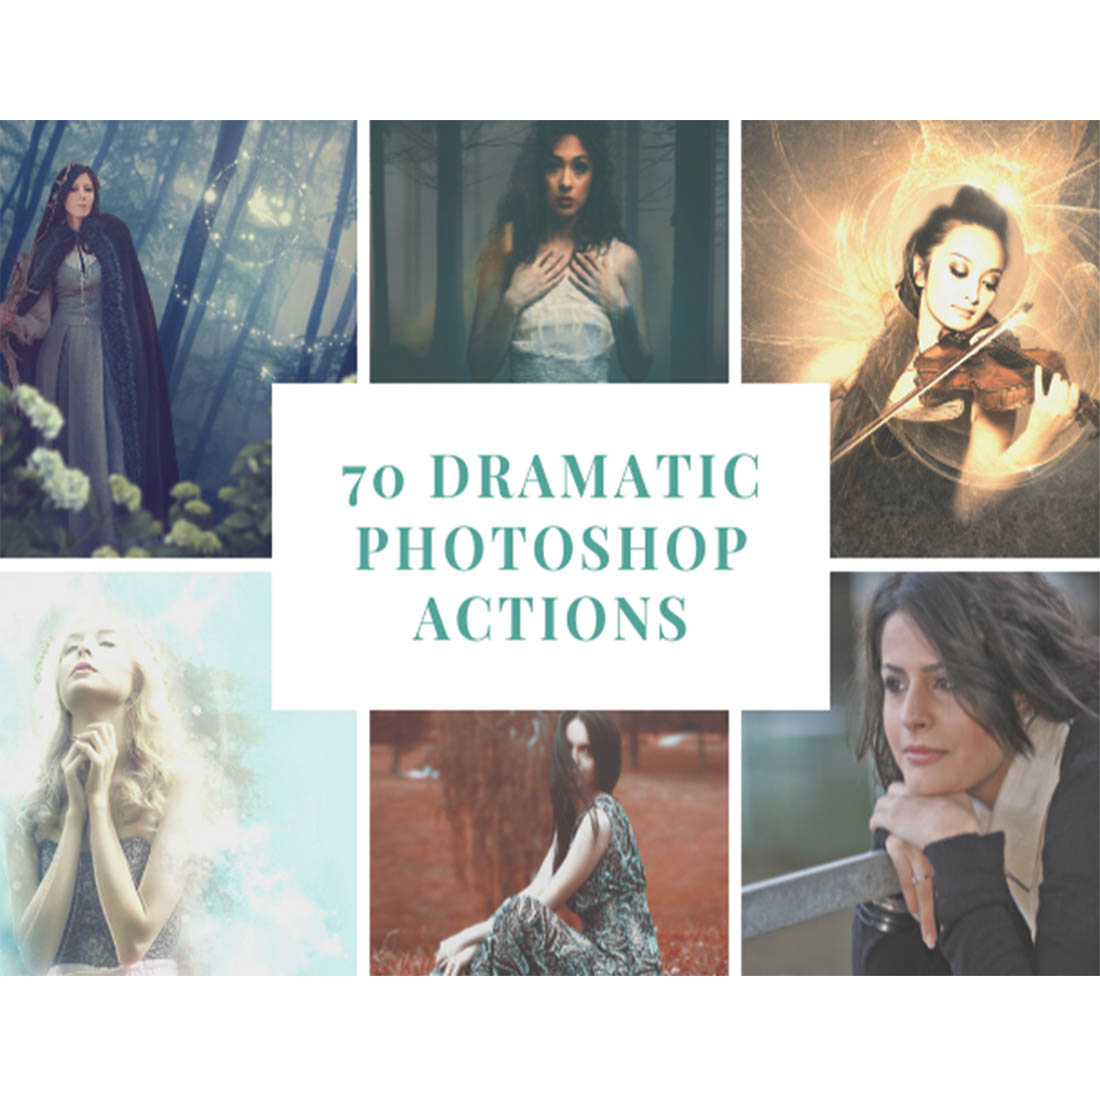 Dramatic Photoshop Actions cover